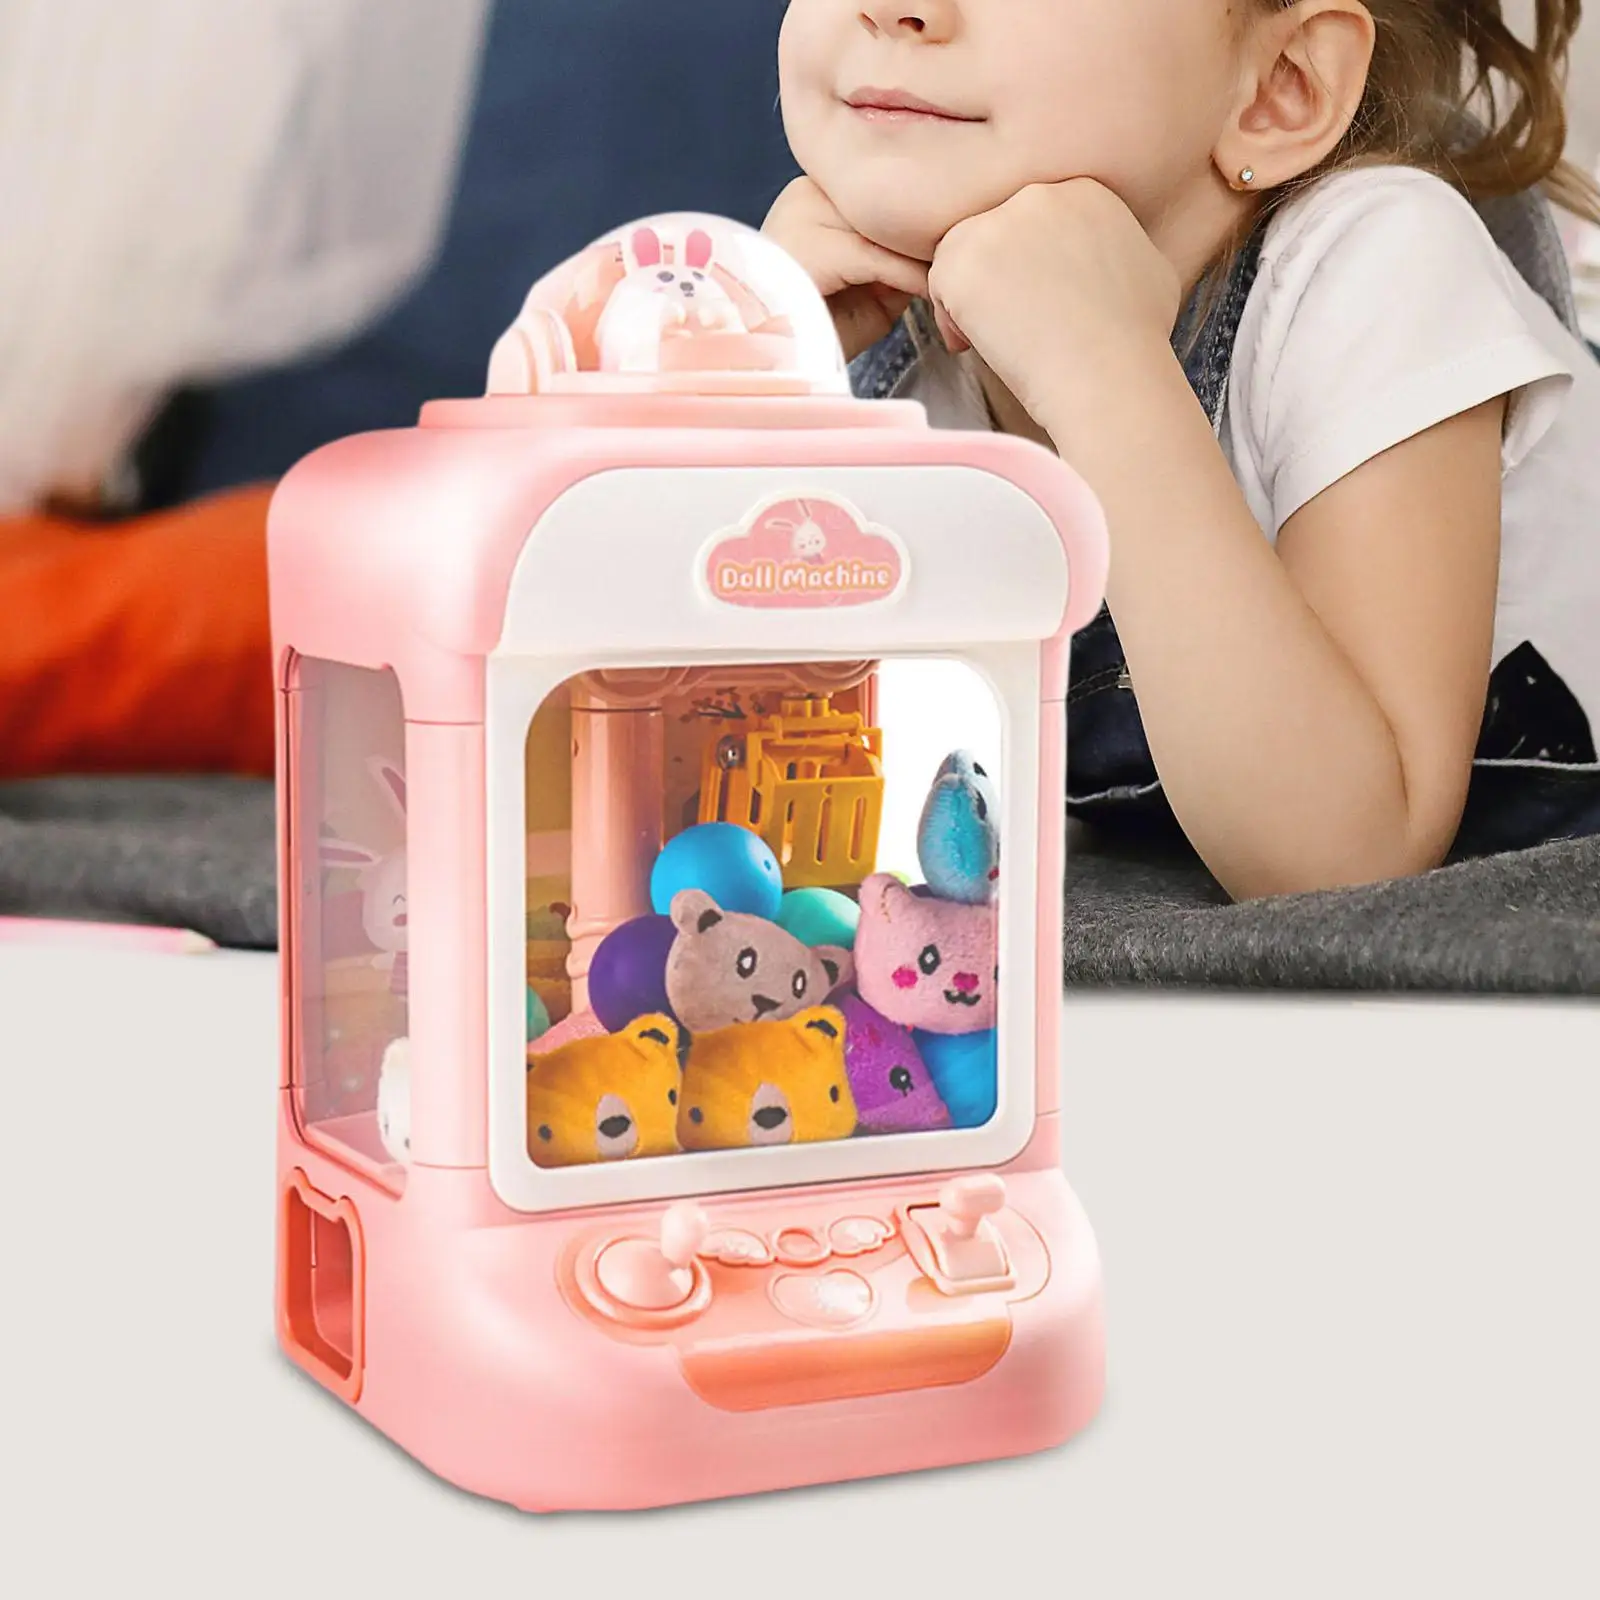 Manual Claw Machine Toy with Sounds Dolls Vending Grabber Machine for Kids